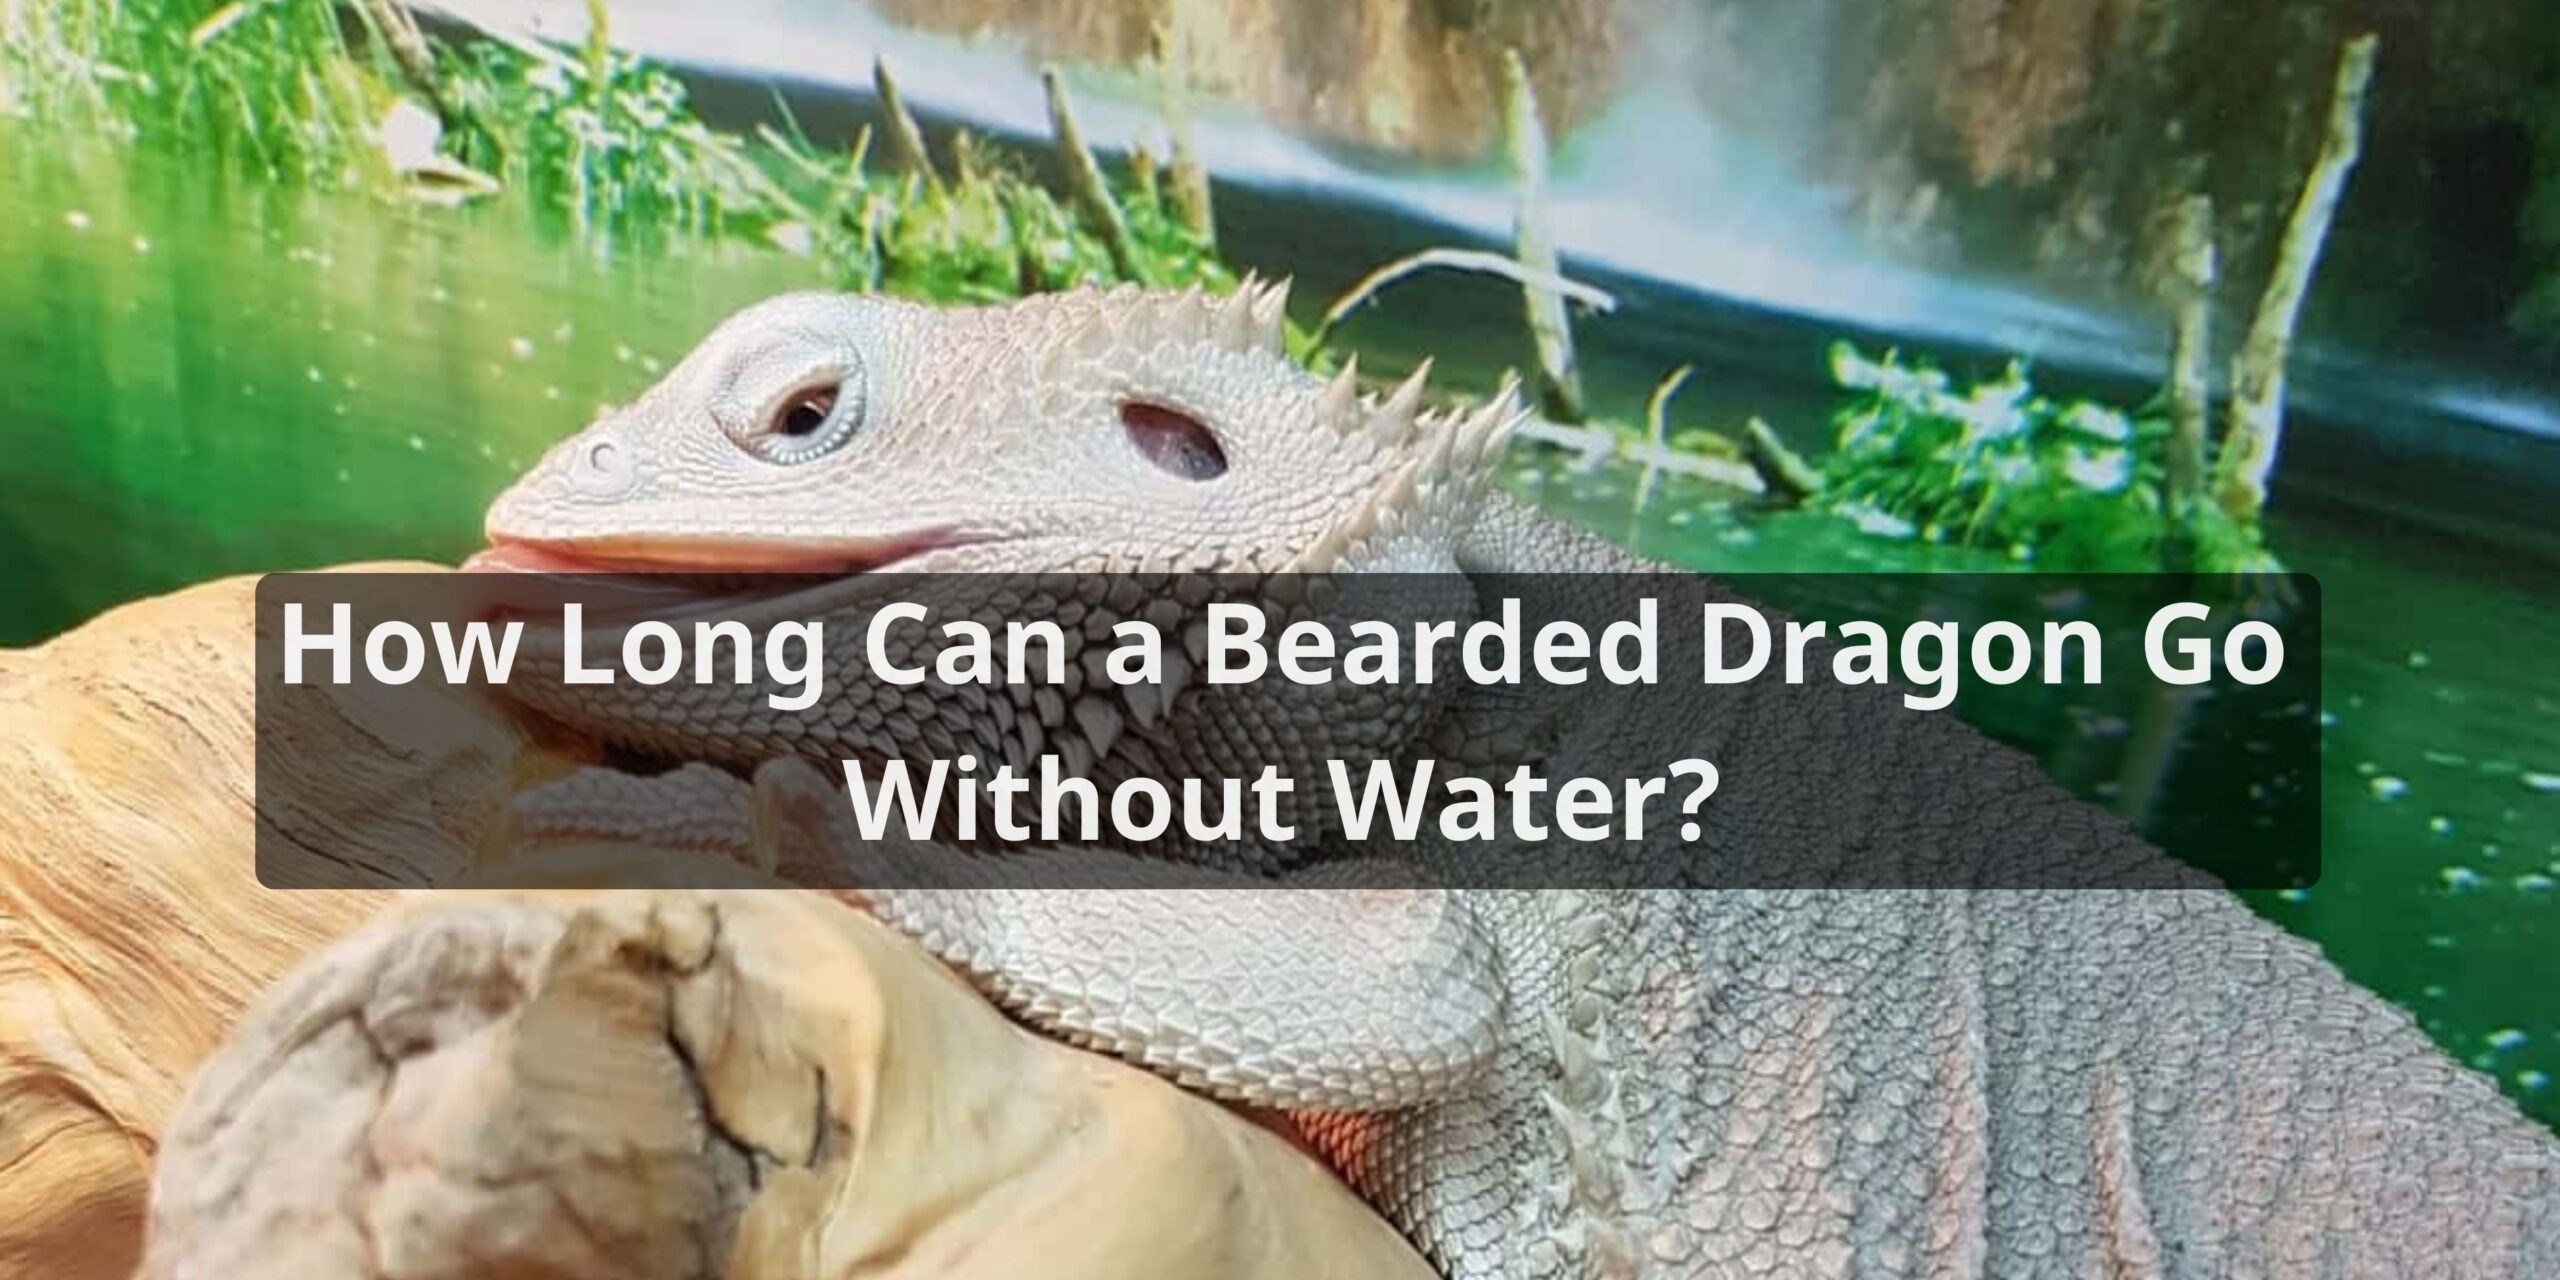 How Long Can a Bearded Dragon Go Without Water